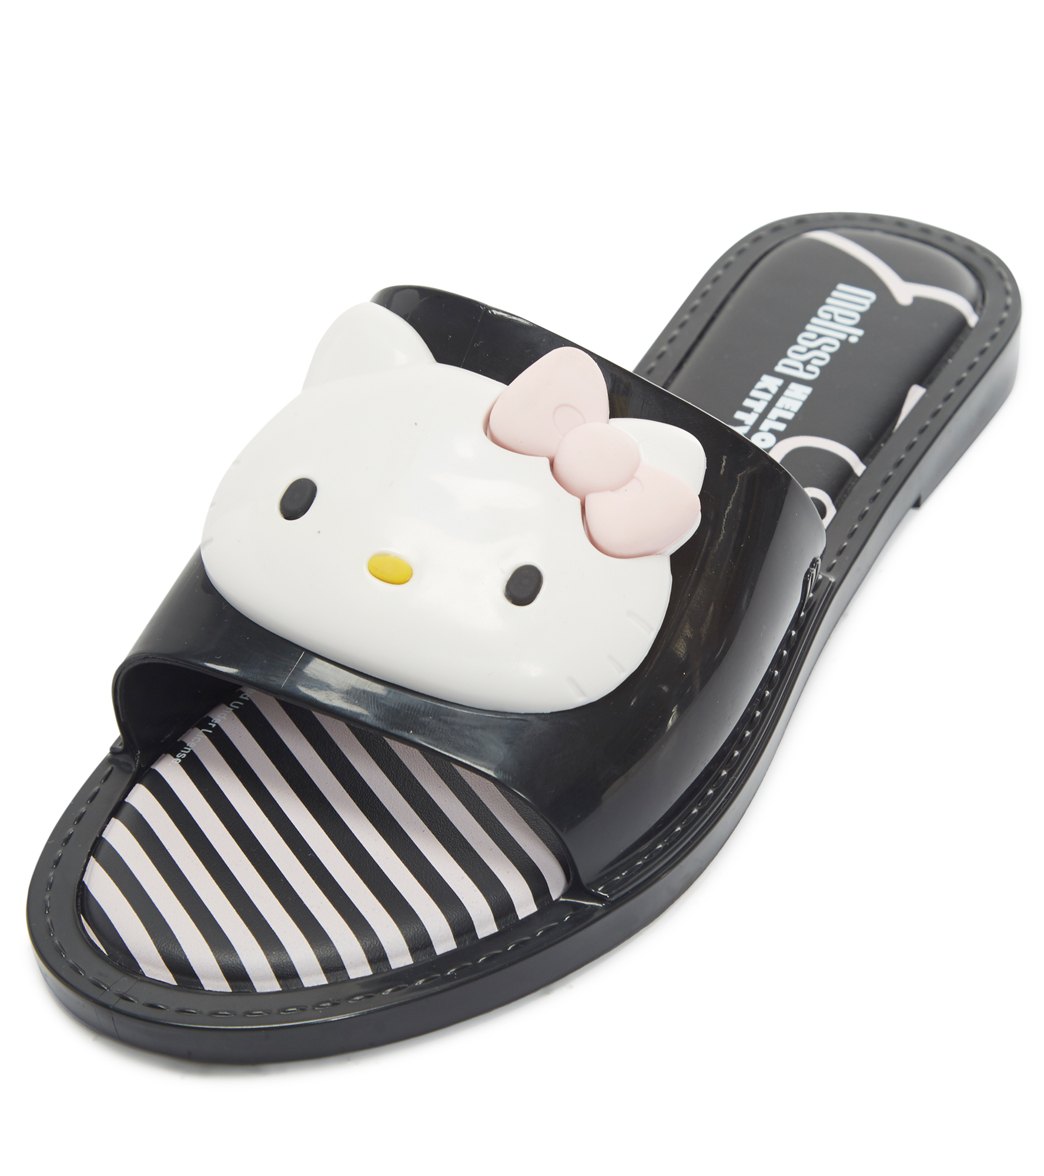 Mel By Melissa Slippers + Hello Kitty Shoes - Black/White 7 - Swimoutlet.com